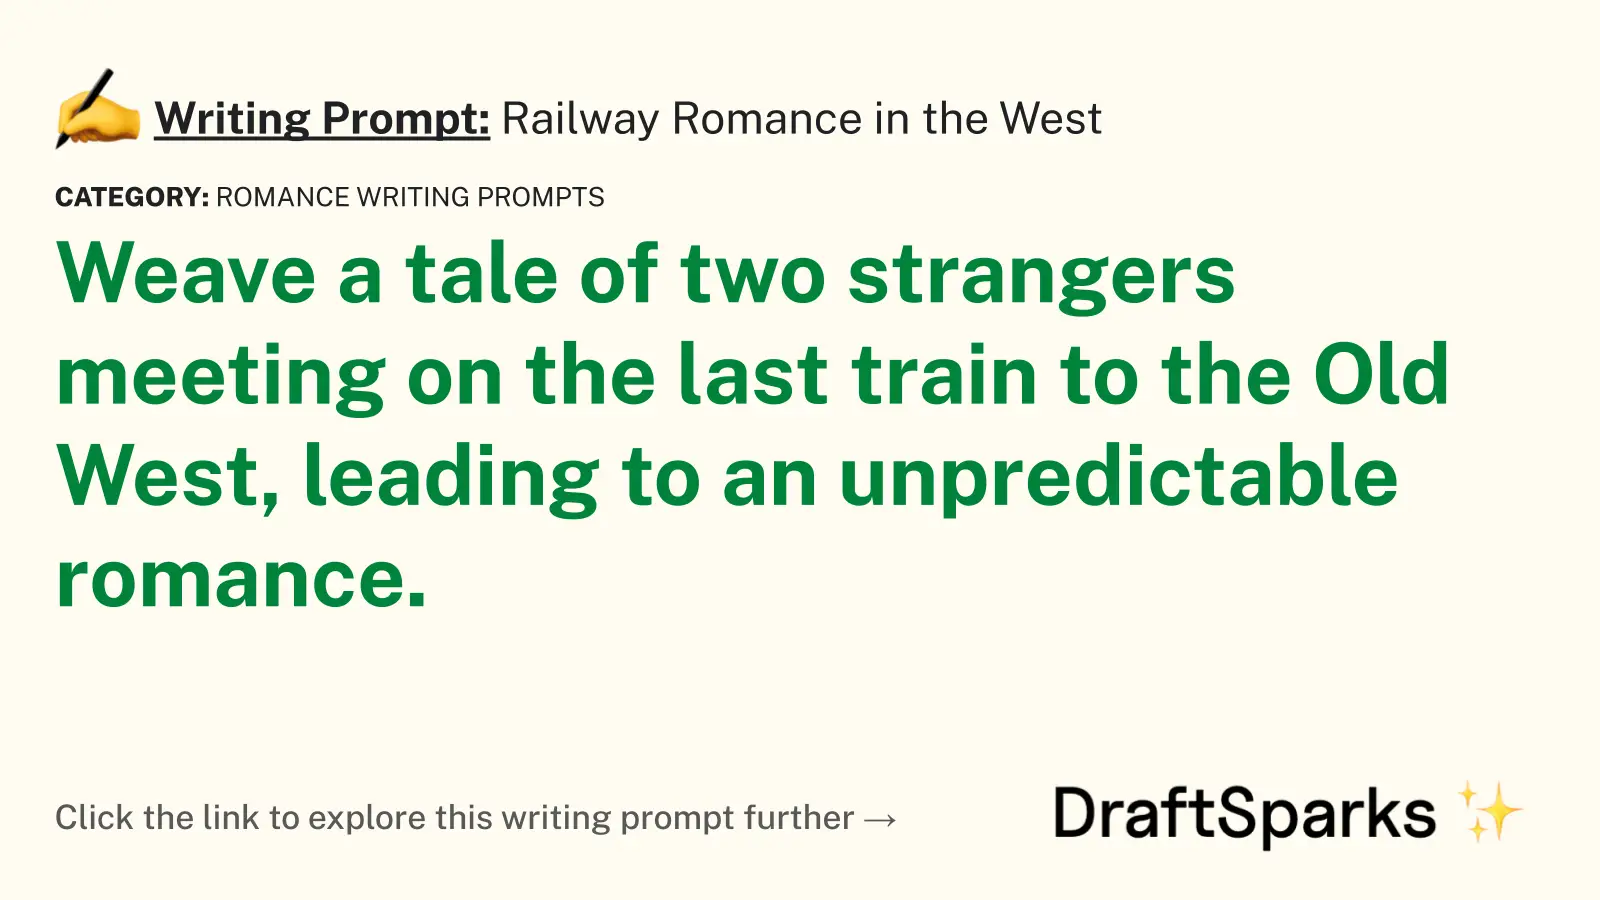 Railway Romance in the West